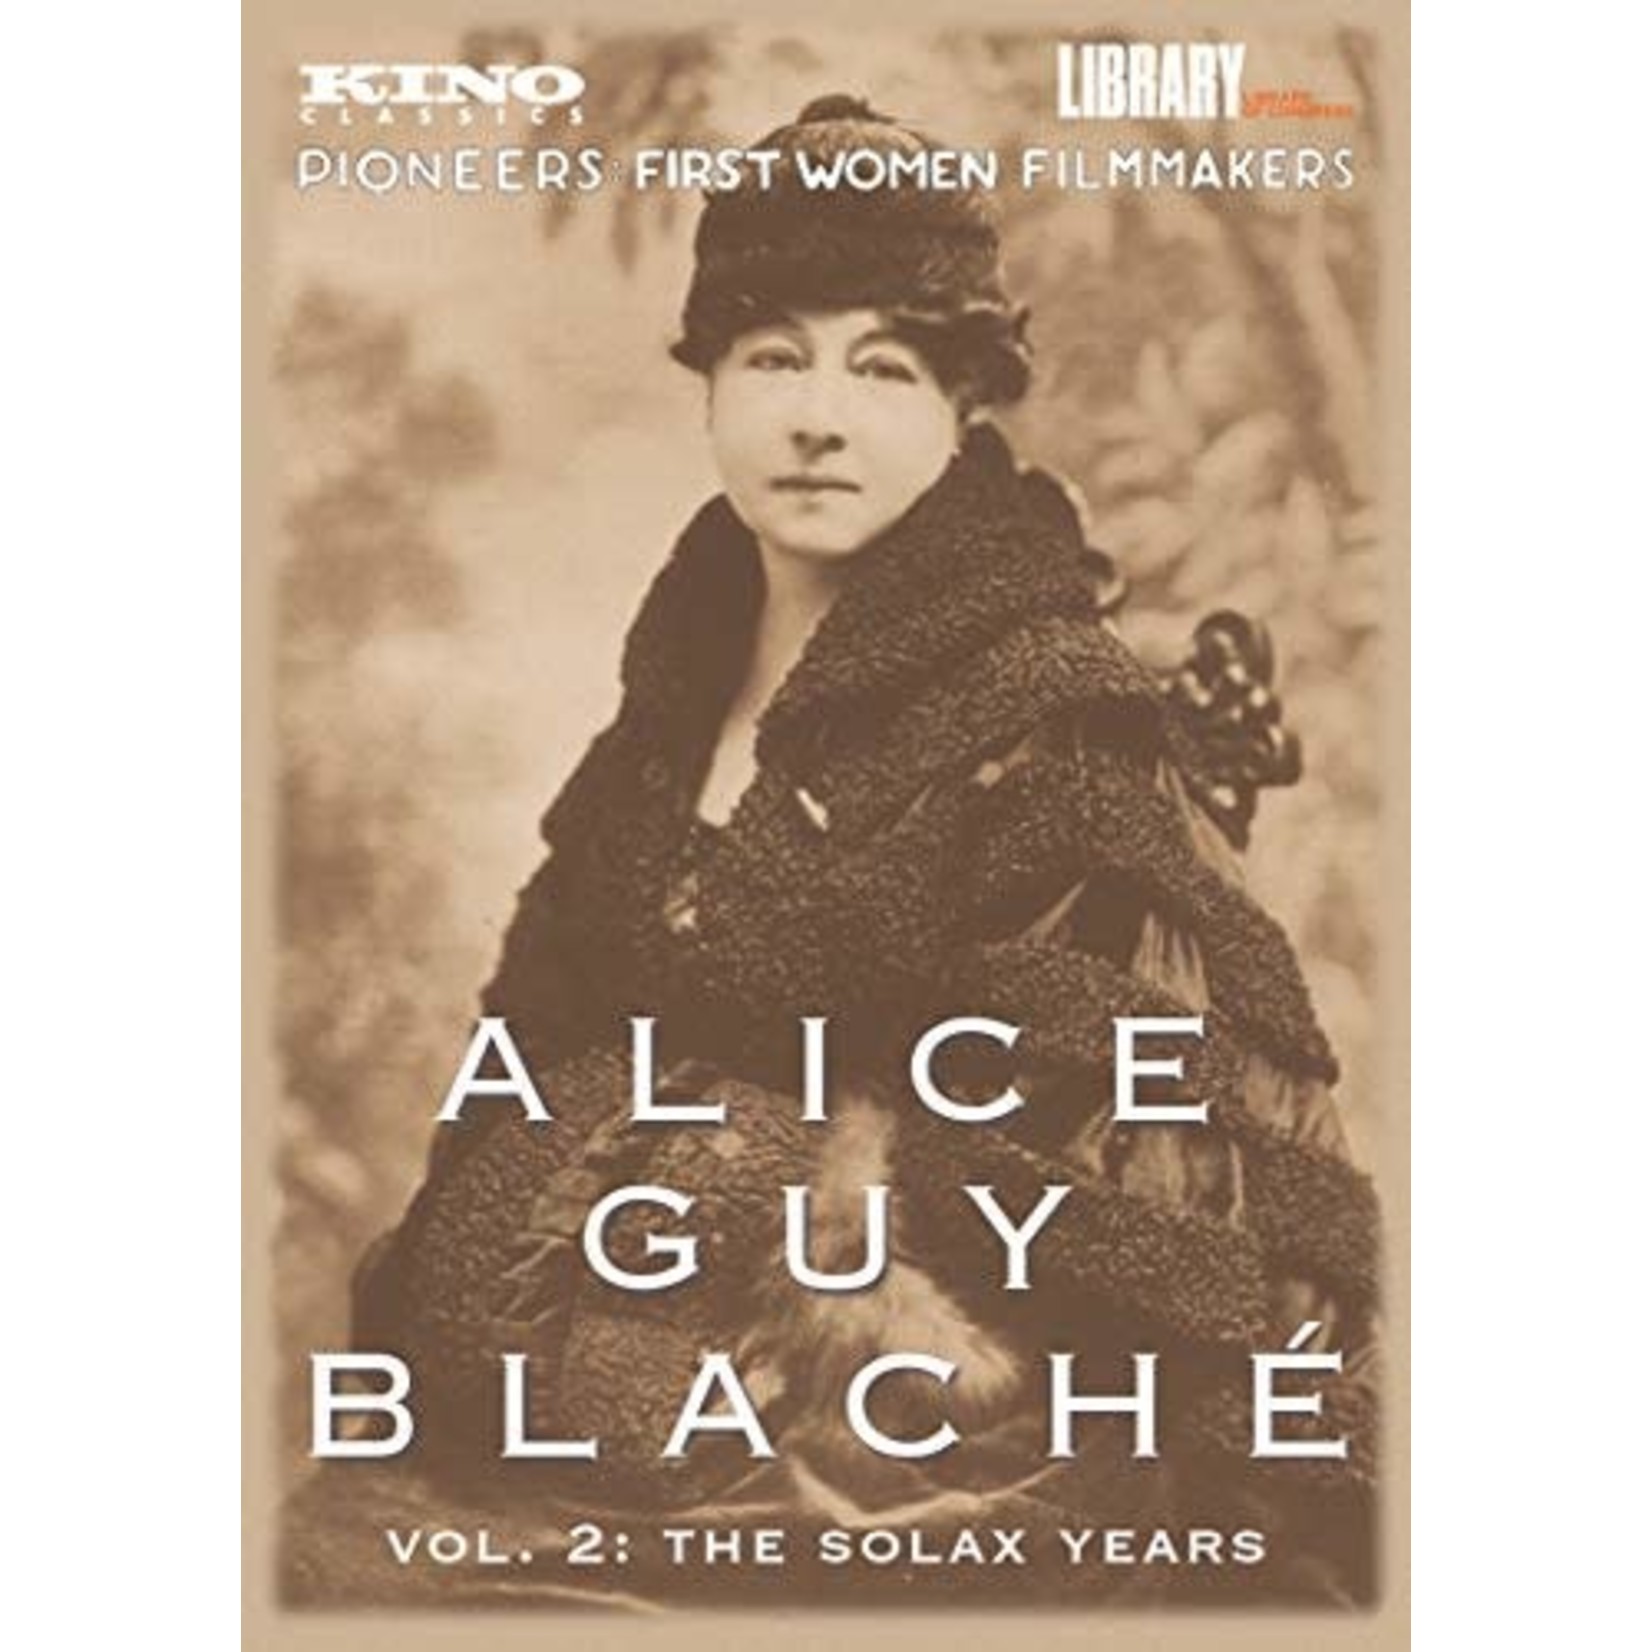 Alice Guy-Blache - Vol. 2: The Solax Years [DVD]